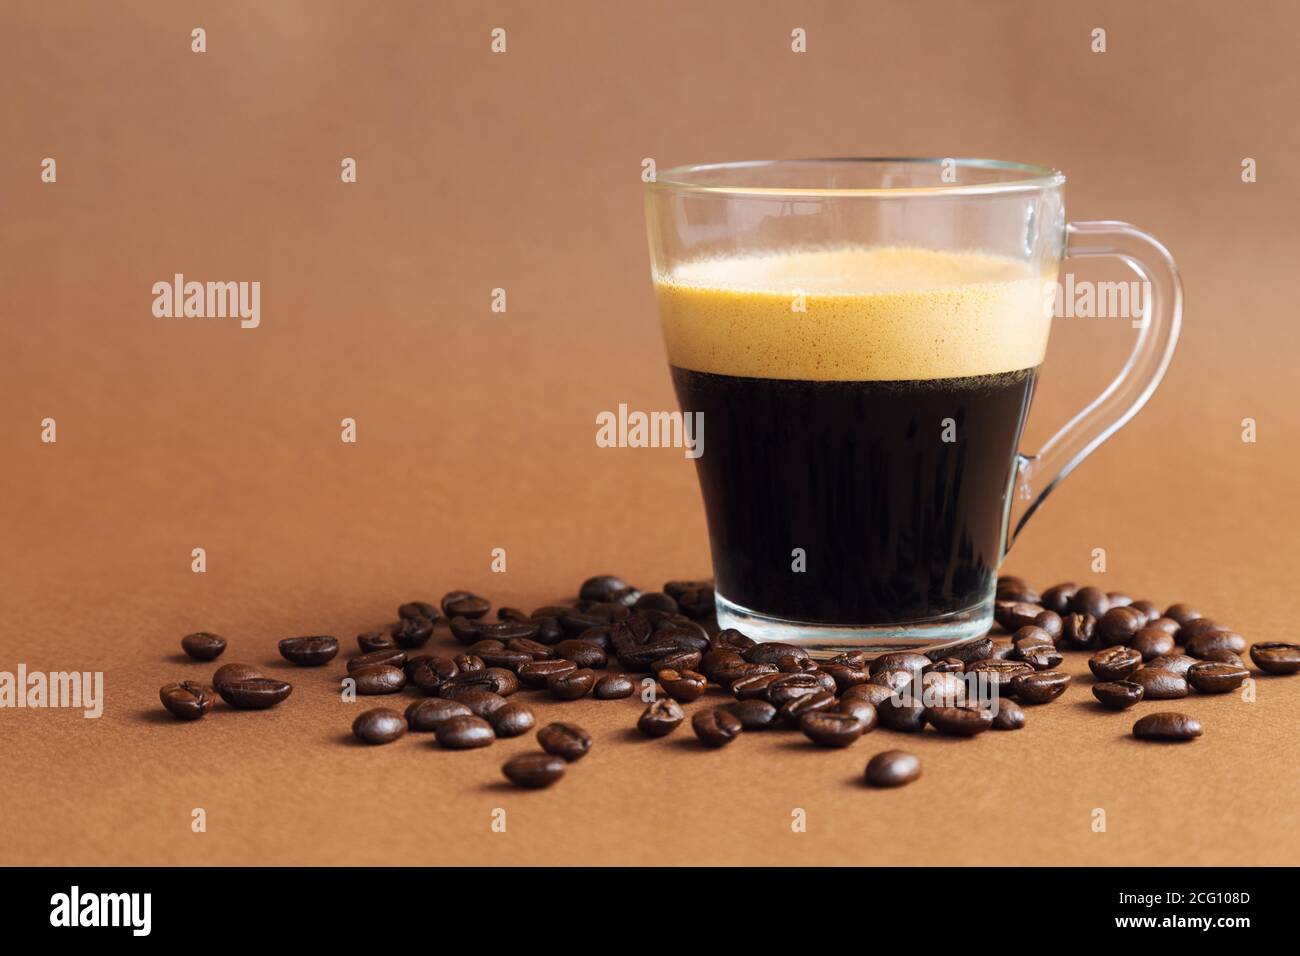 Cup with espresso coffee on brown background with coffee beans. Minimalist monochrome design. Stock Photo